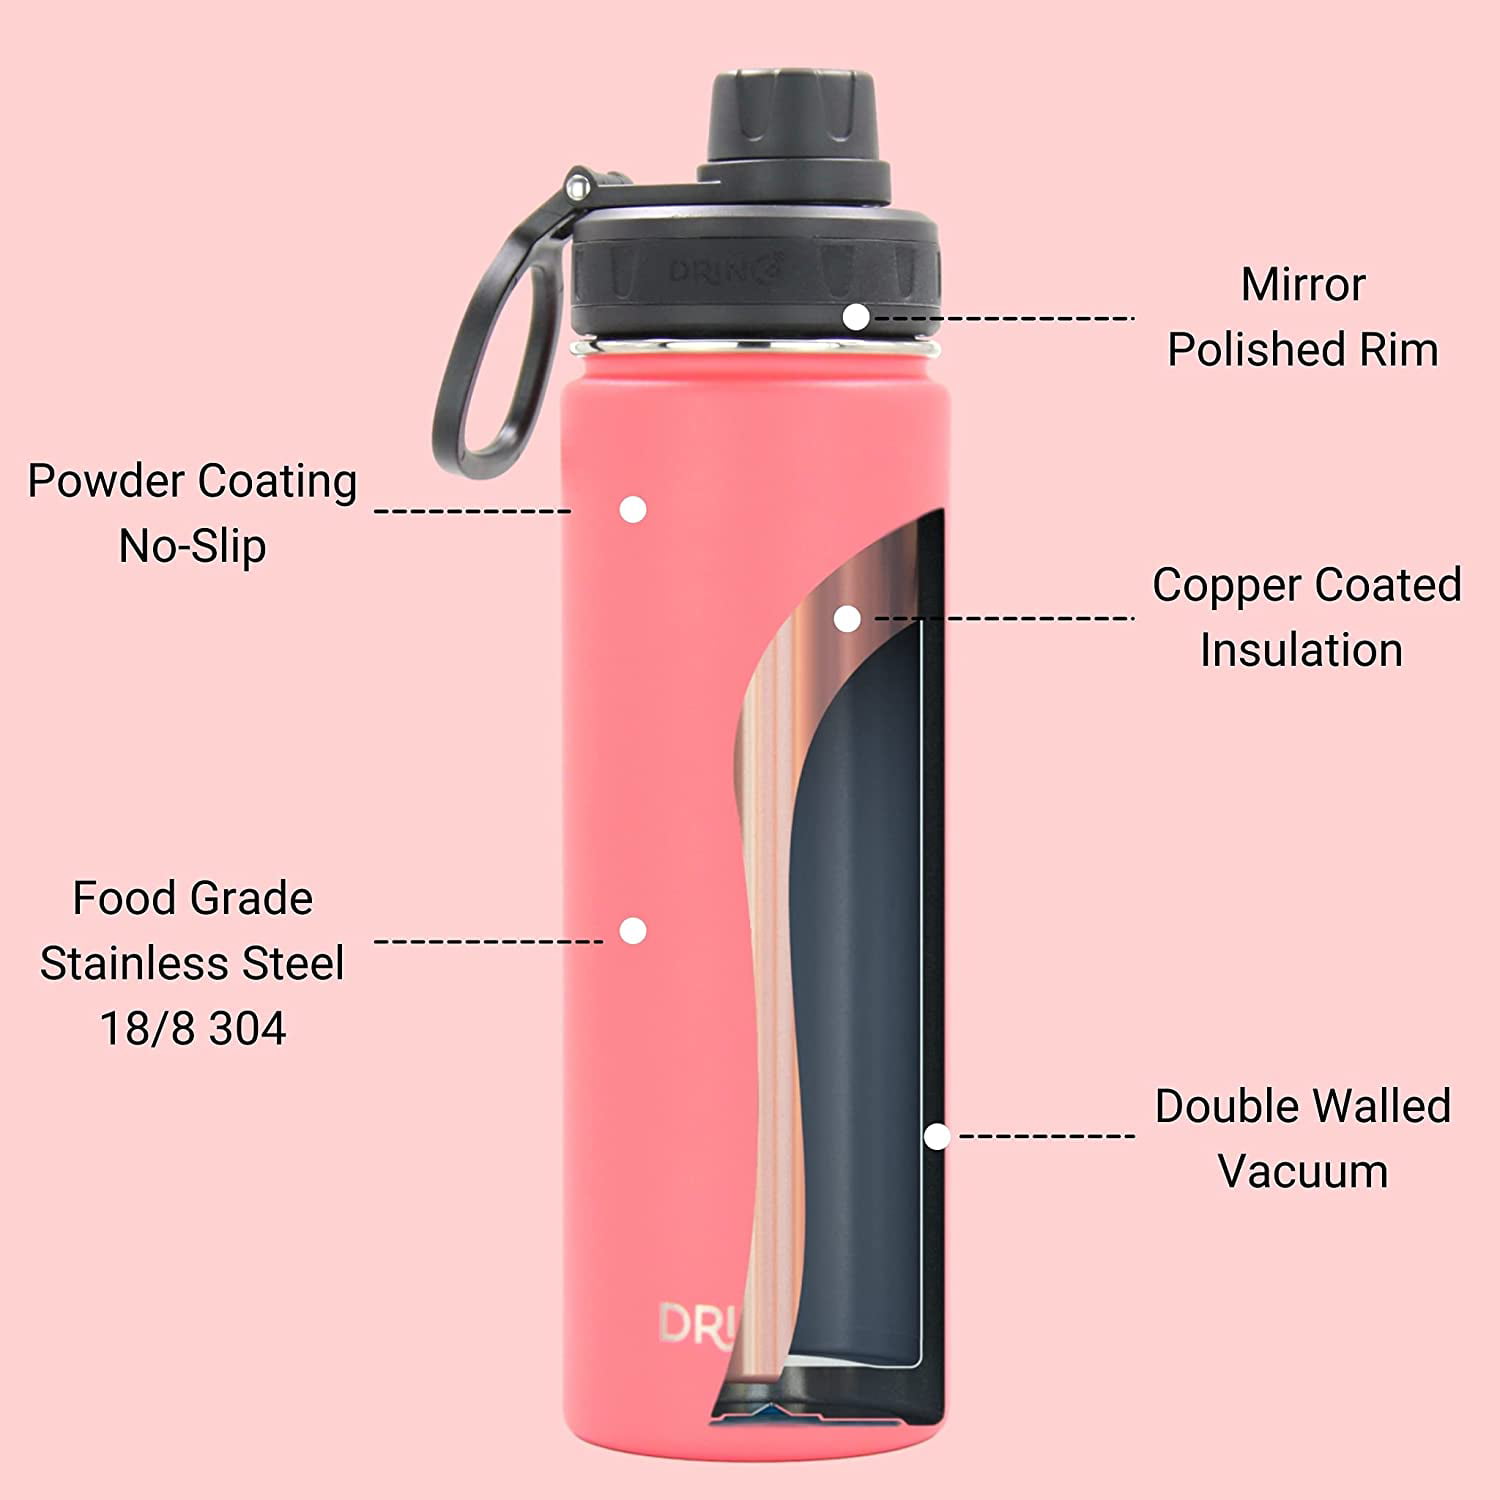 Liberty 12 oz. Dijon Insulated Stainless Steel Water Bottle with D-Ring Lid  DW1261200000 - The Home Depot